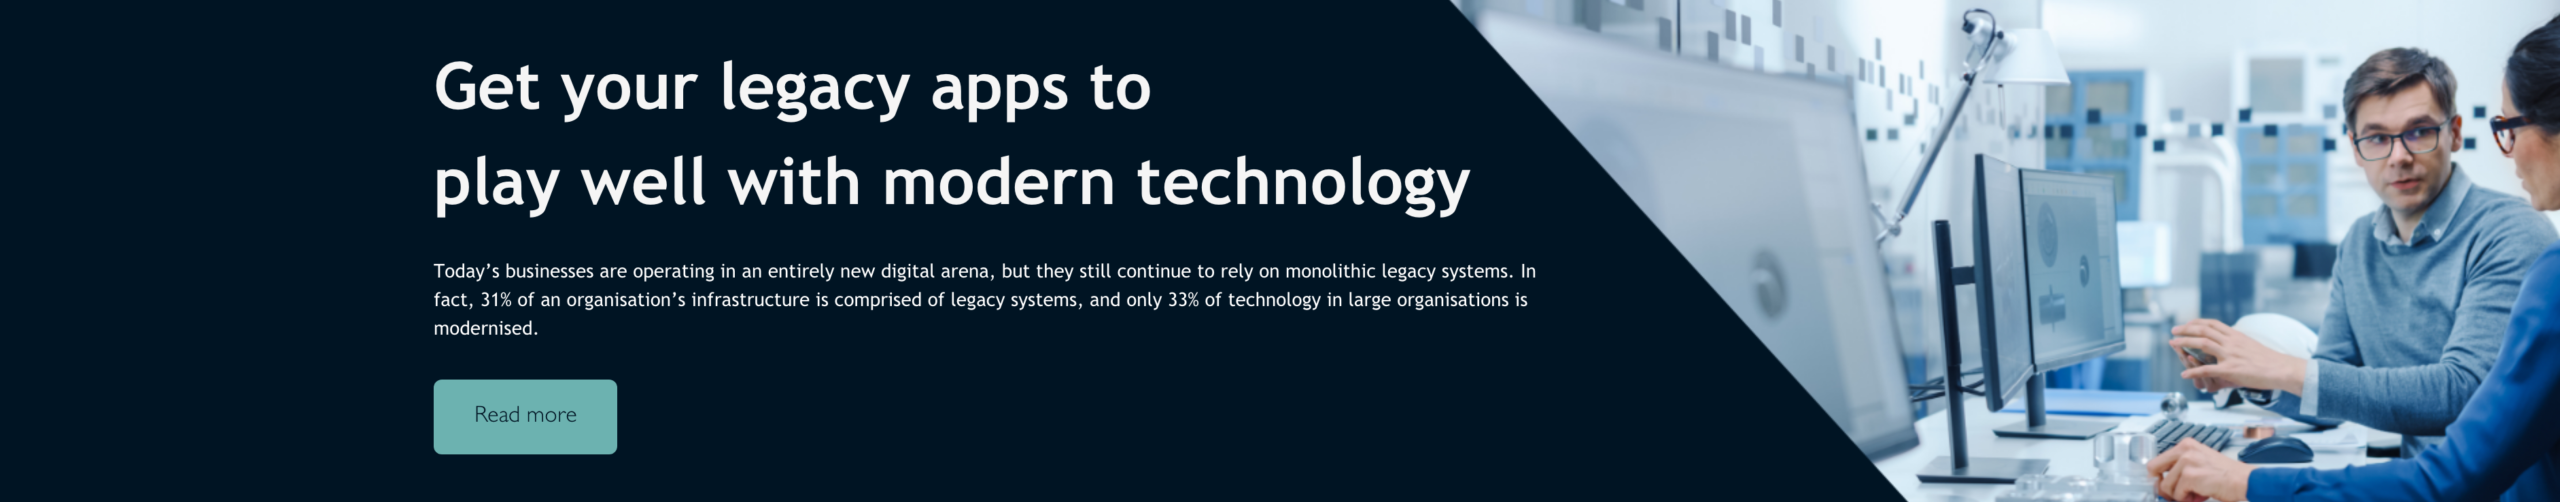 Get your legacy apps to play well with modern technology Banner